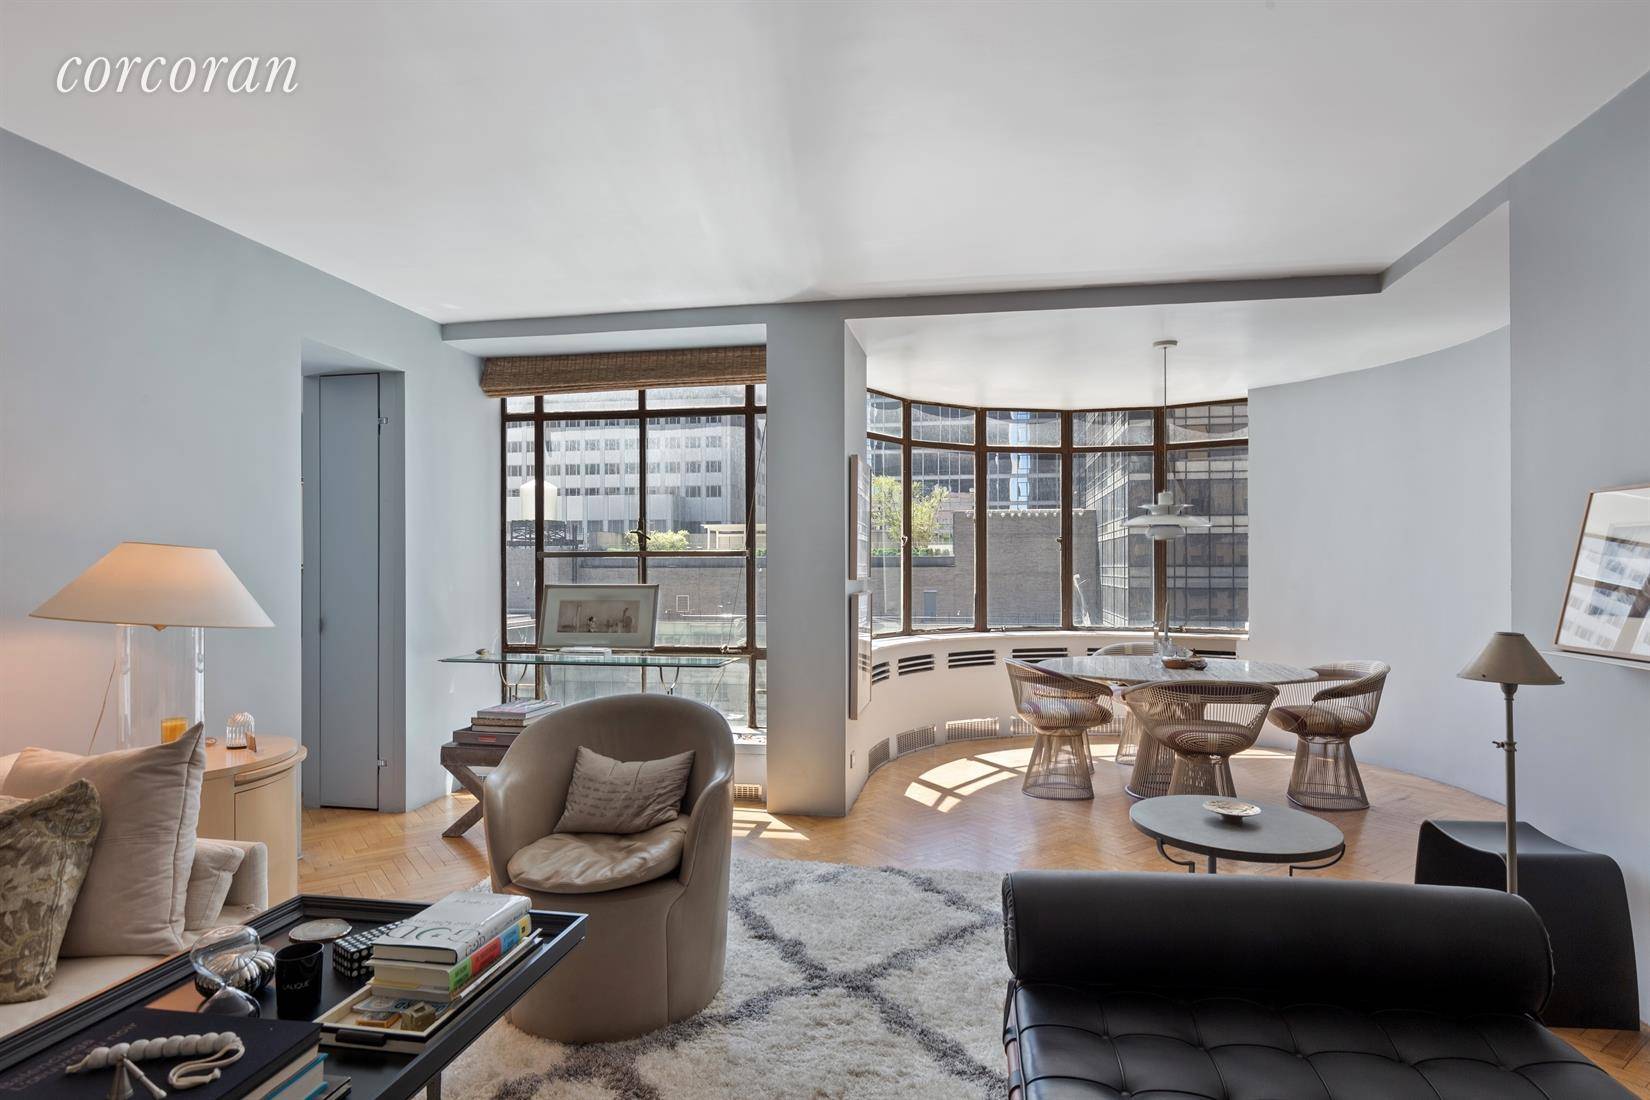 Apt. 10C, 17 West 54th Street is a glamorous, pristine extraordinarily large one bedroom in the renown Rockefeller Apartments, overlooking the Museum of Modern Art sculpture garden.